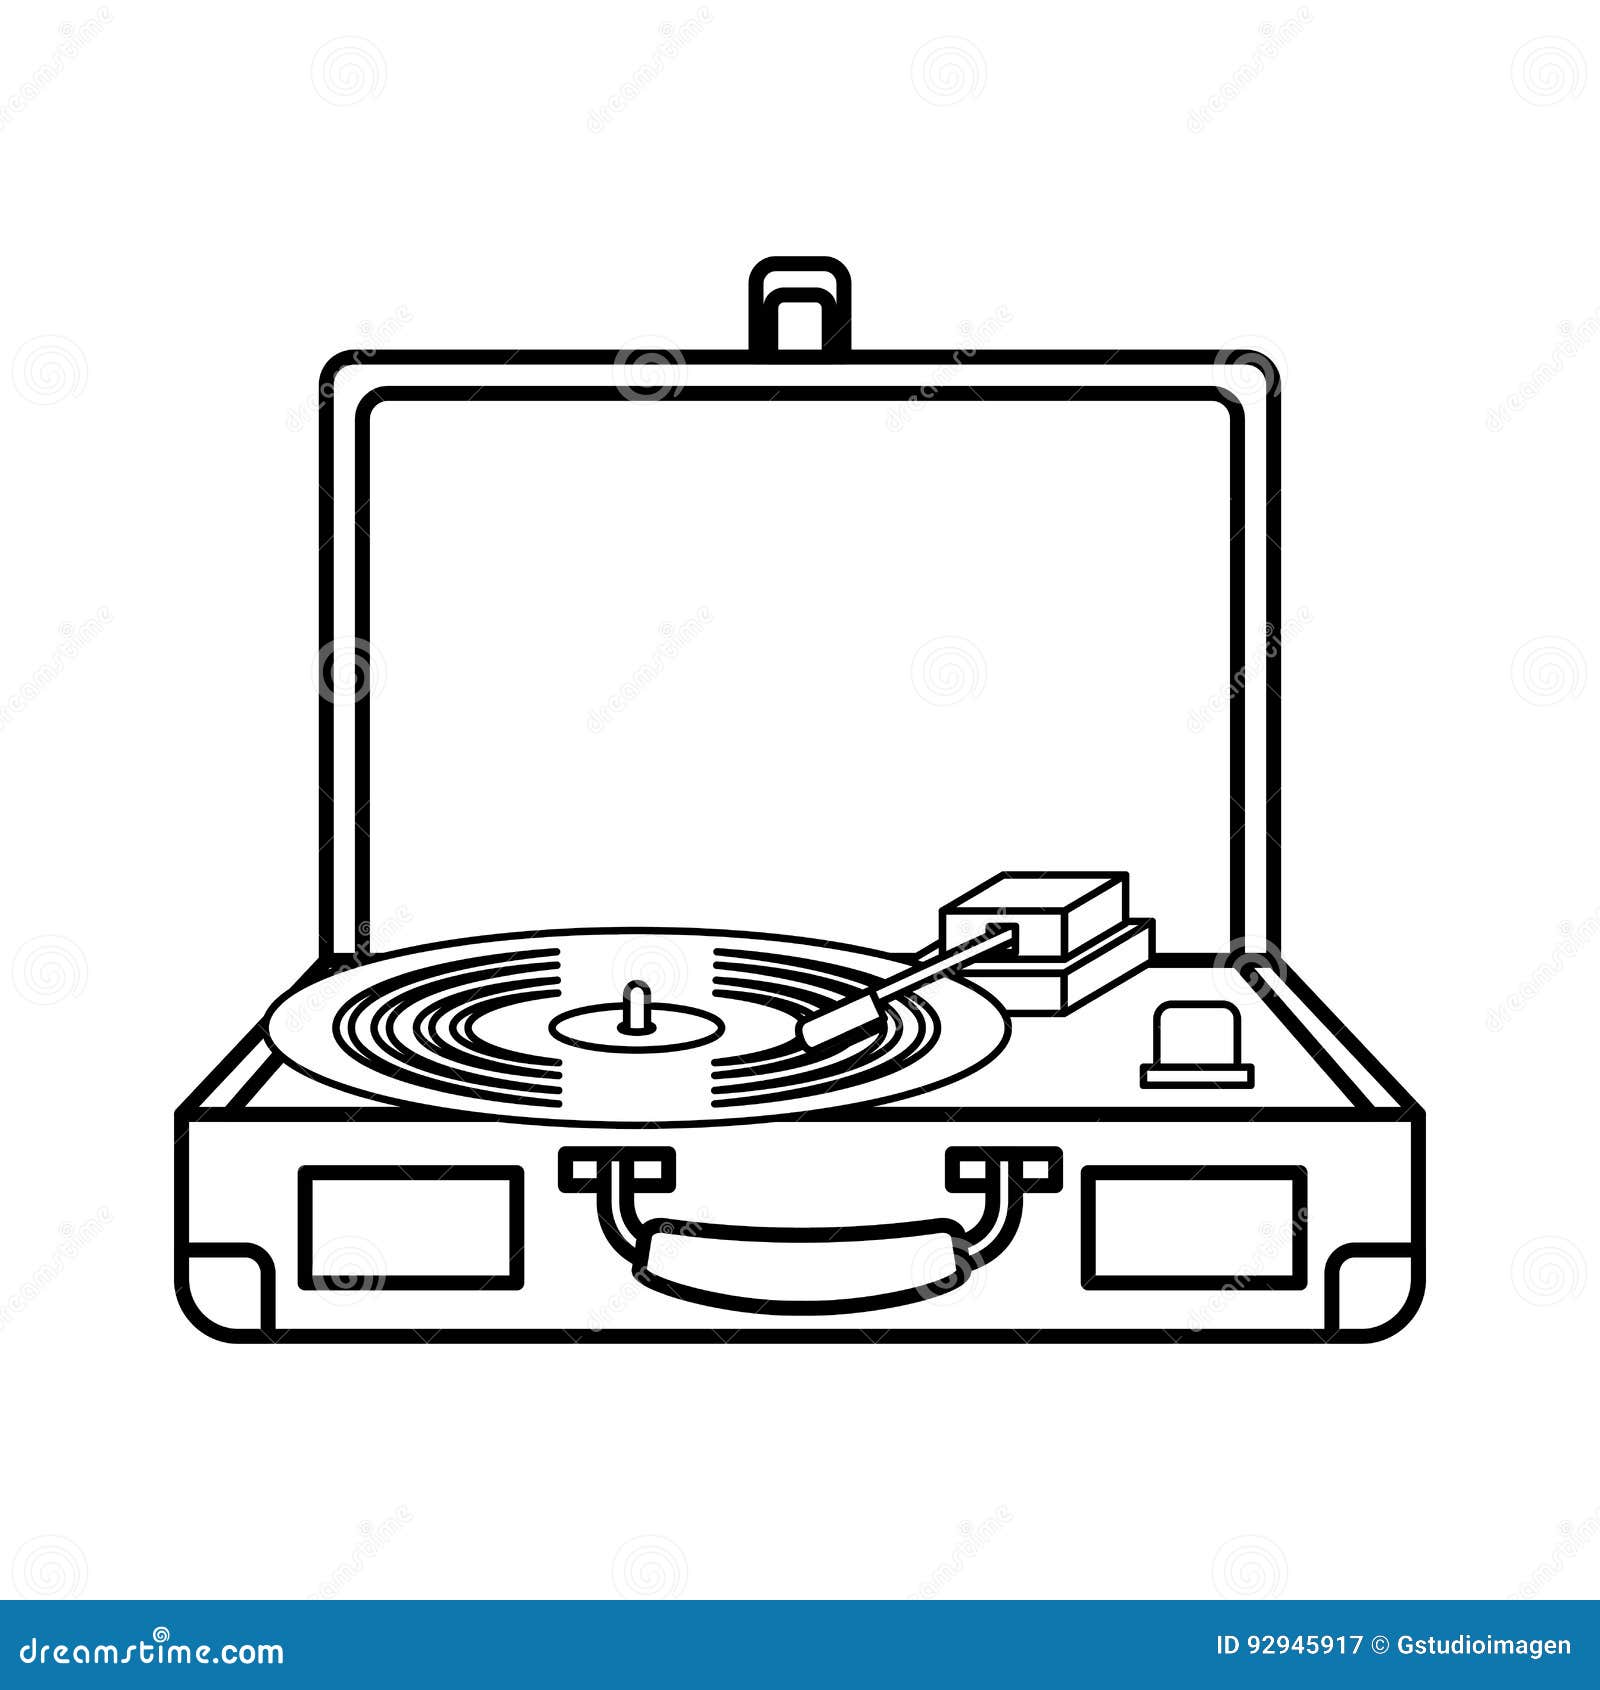 Old Record Player Vinyl Record Stock Vector - Illustration of object ...